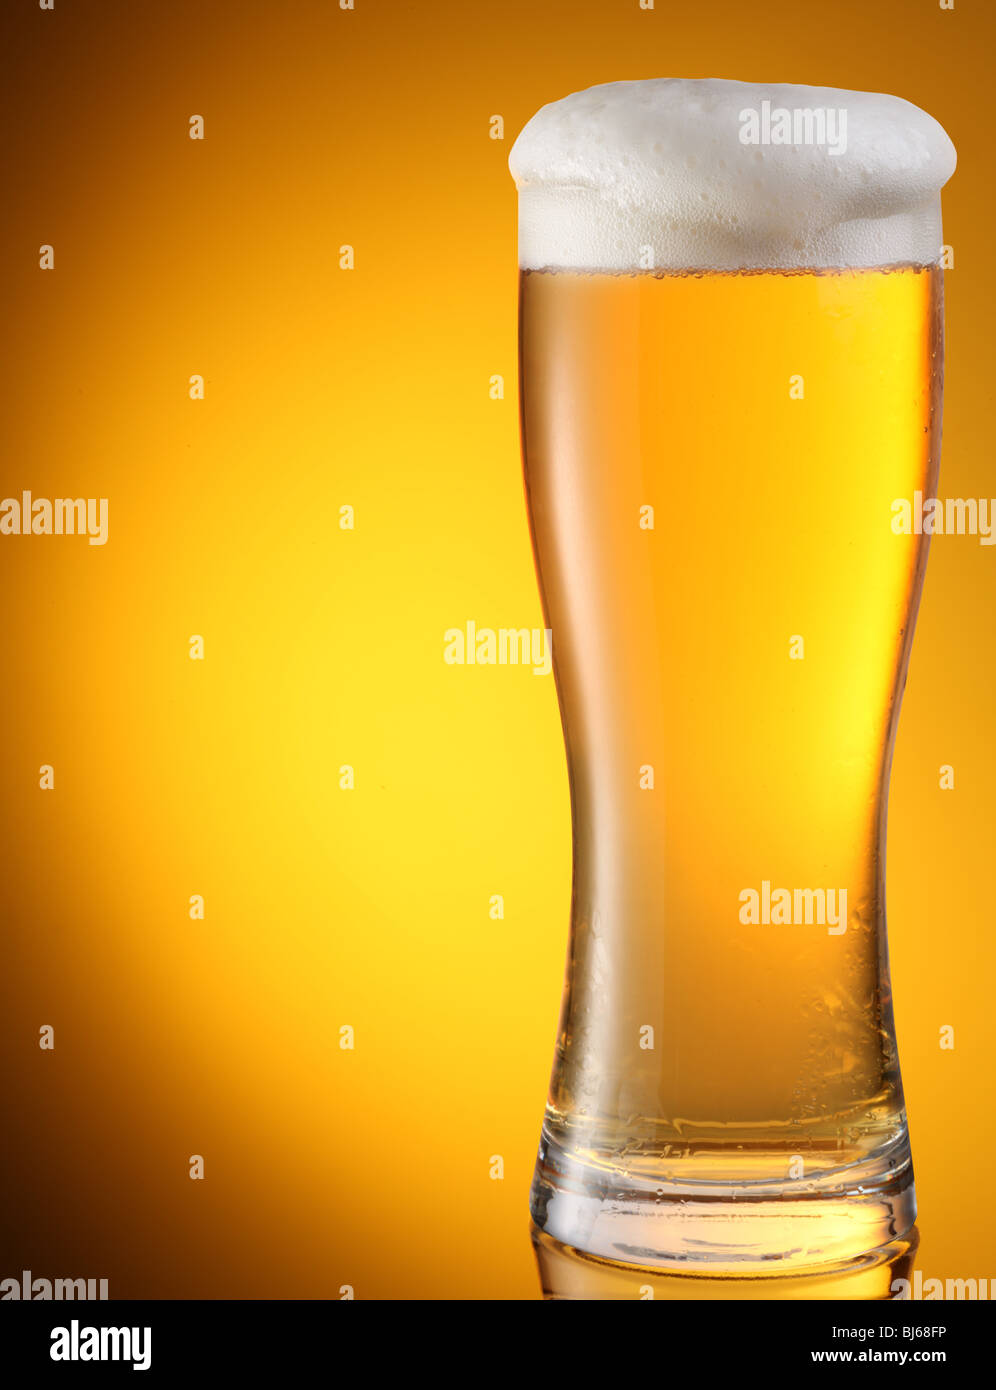 glass of beer on a yellow background Stock Photo